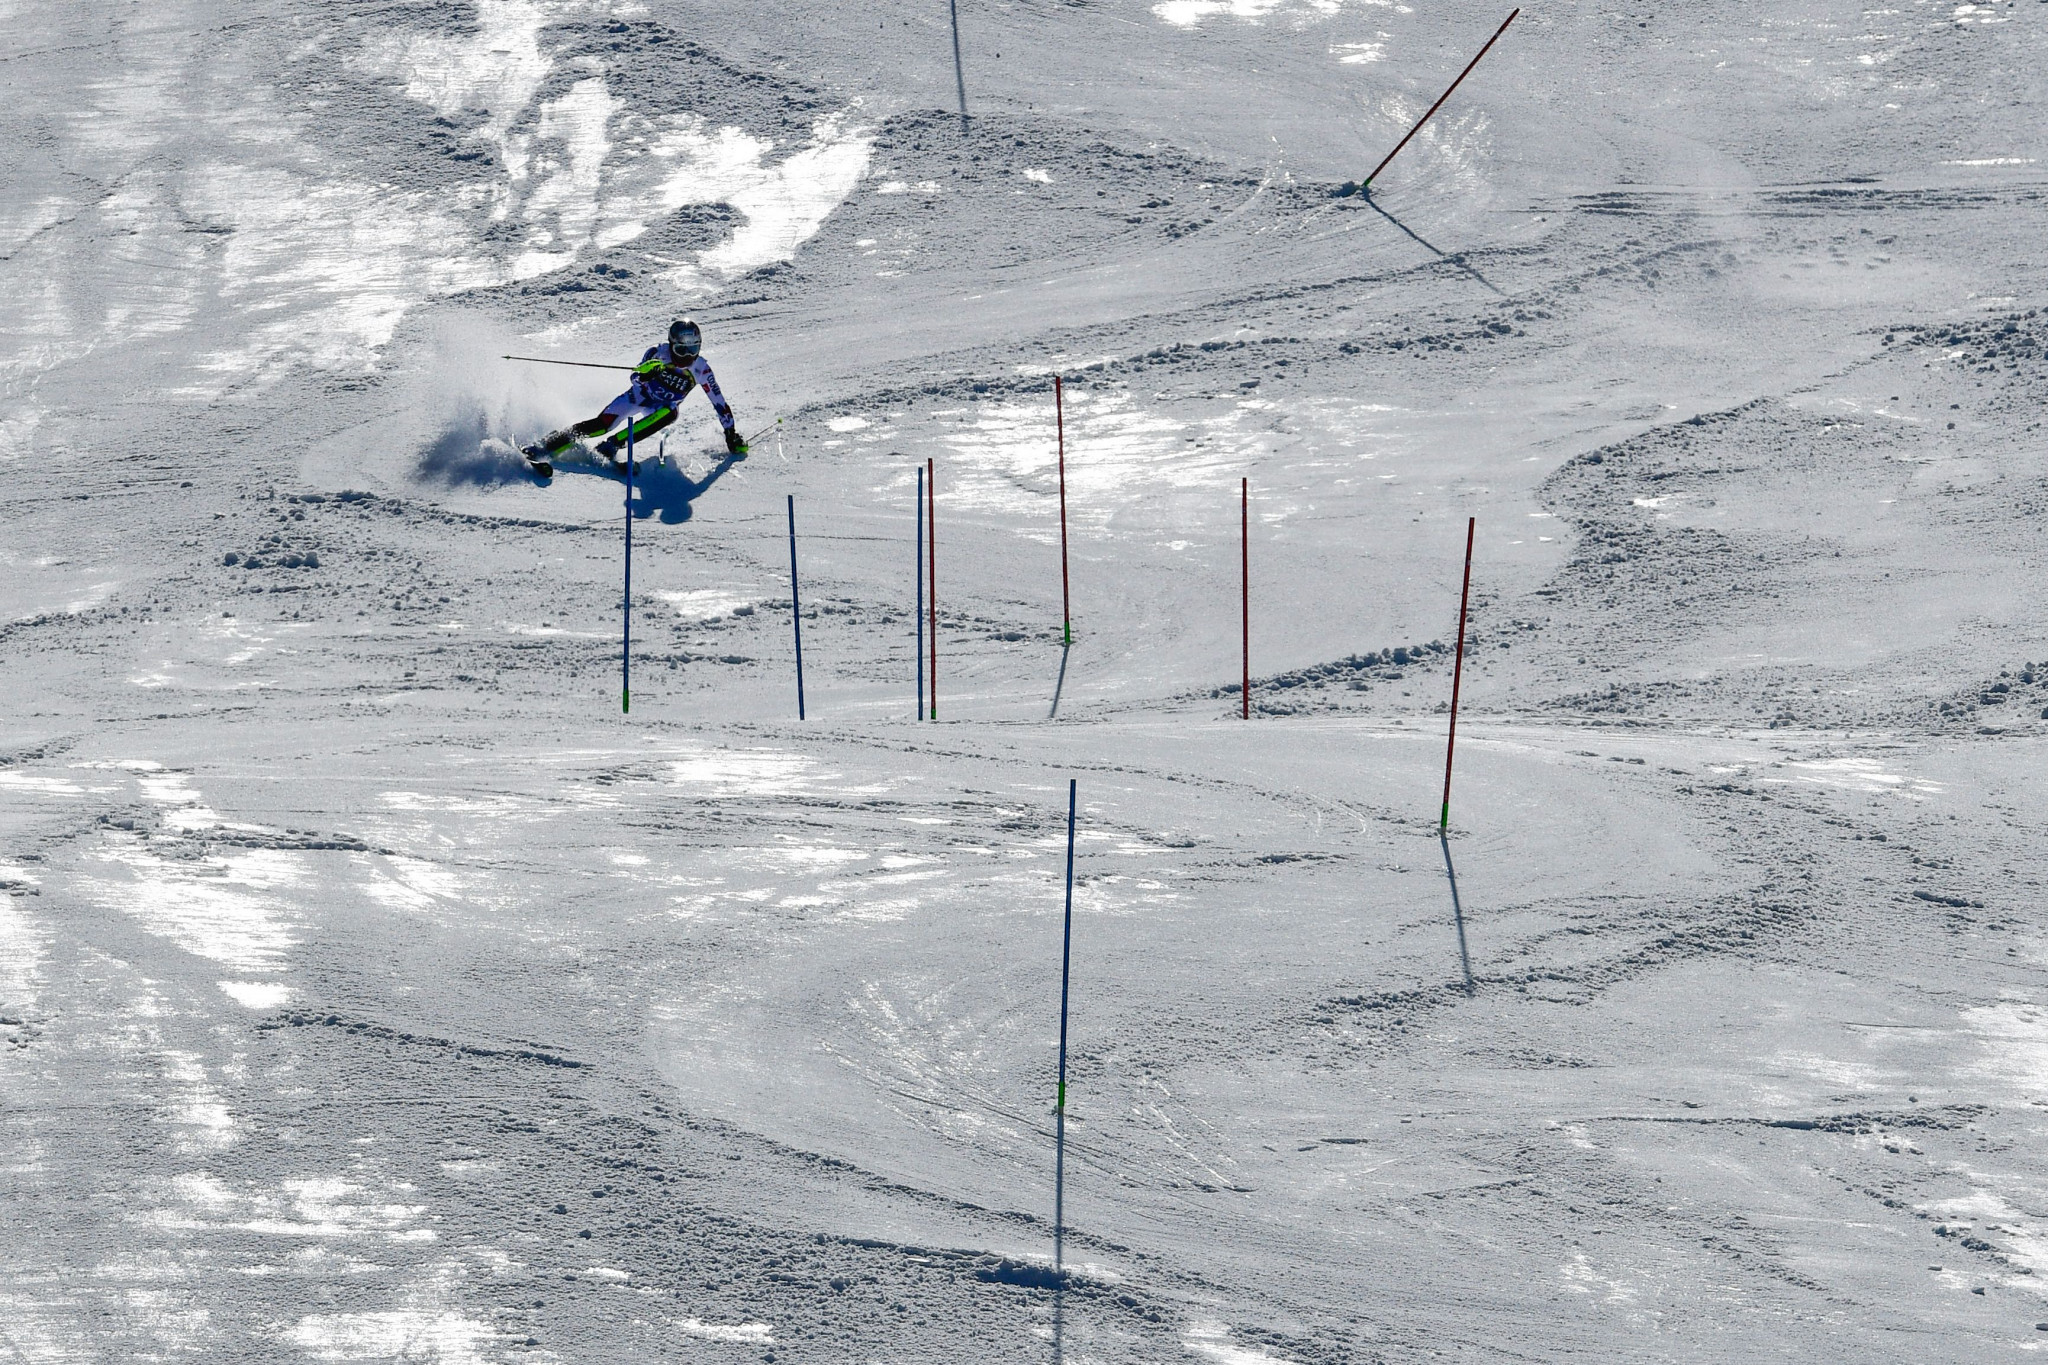 High quality snow has been promised for Alpine skiing events ©Getty Images